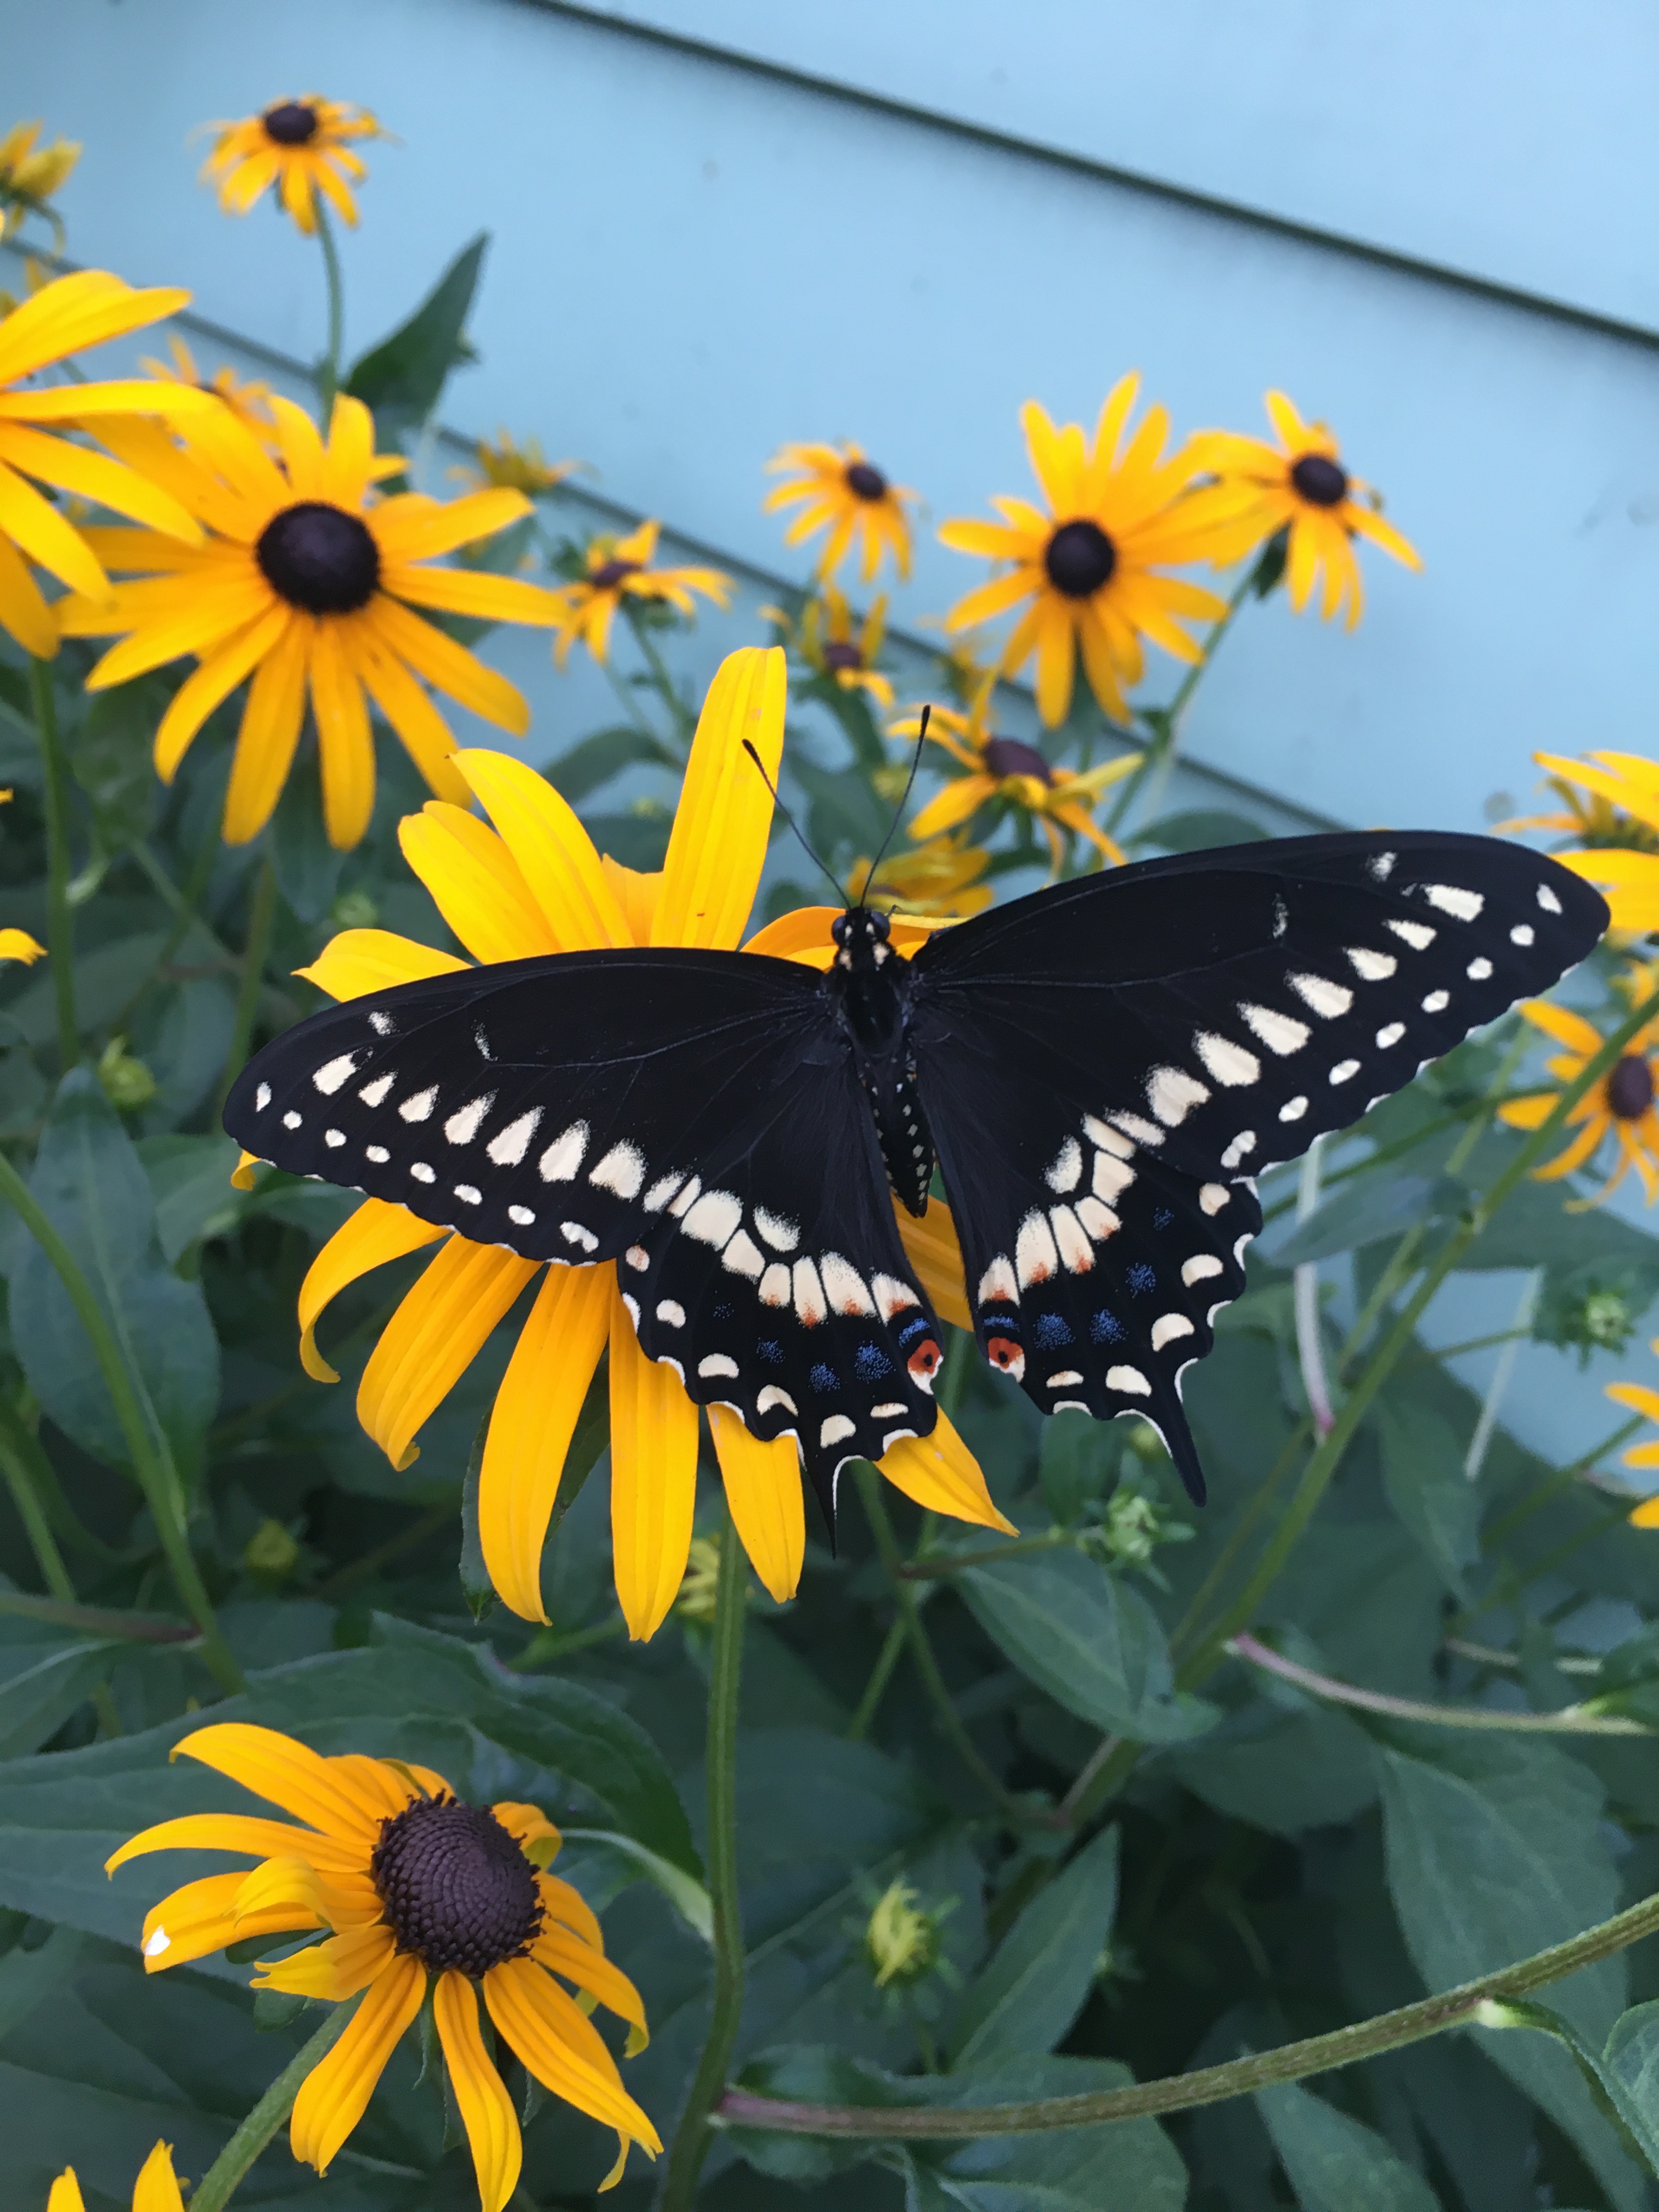 Black swallowtail on a yellow flower.